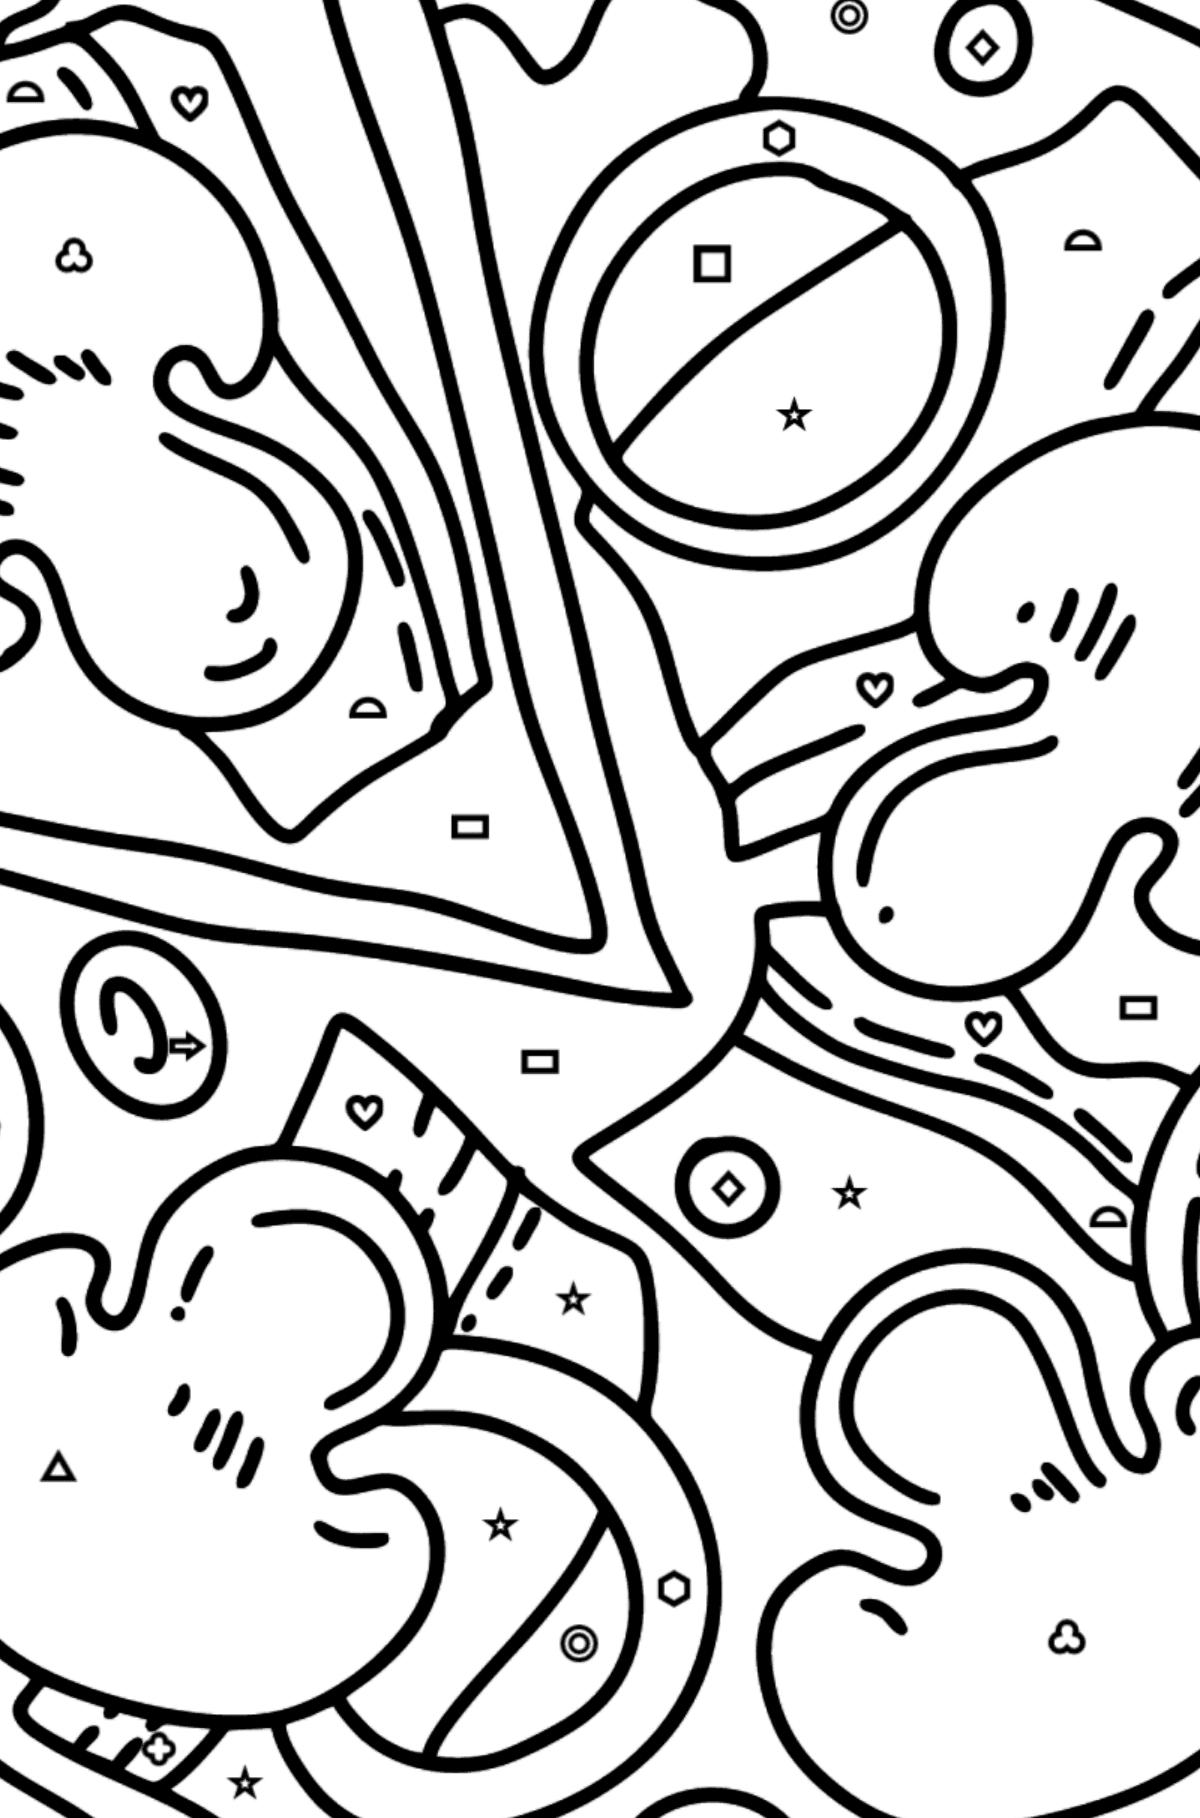 Pizza with Mushrooms coloring page - Coloring by Geometric Shapes for Kids